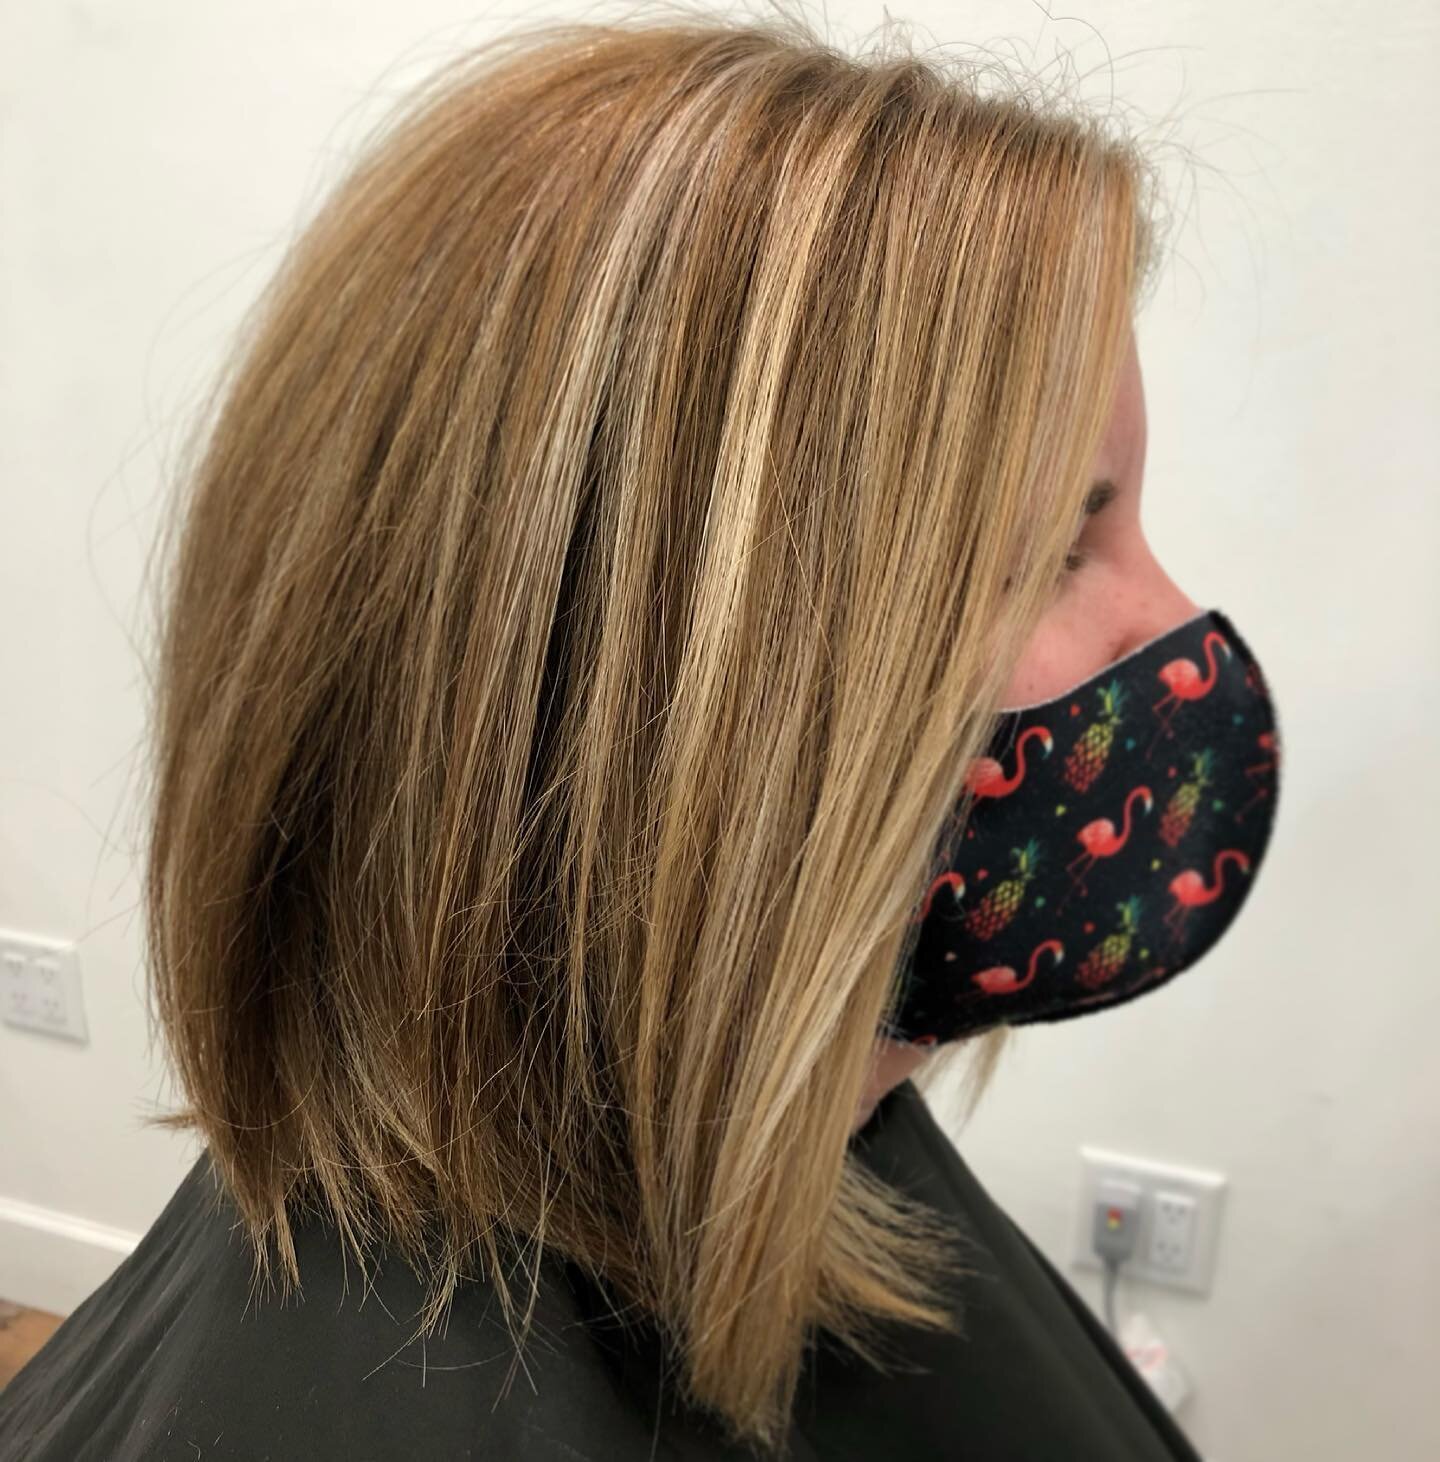 Let&rsquo;s stop and appreciate this perfect placement highlight for a bob. THIS is craft hair color 🎨 cut &amp; color: @kassidy_geminiofchicagoaz